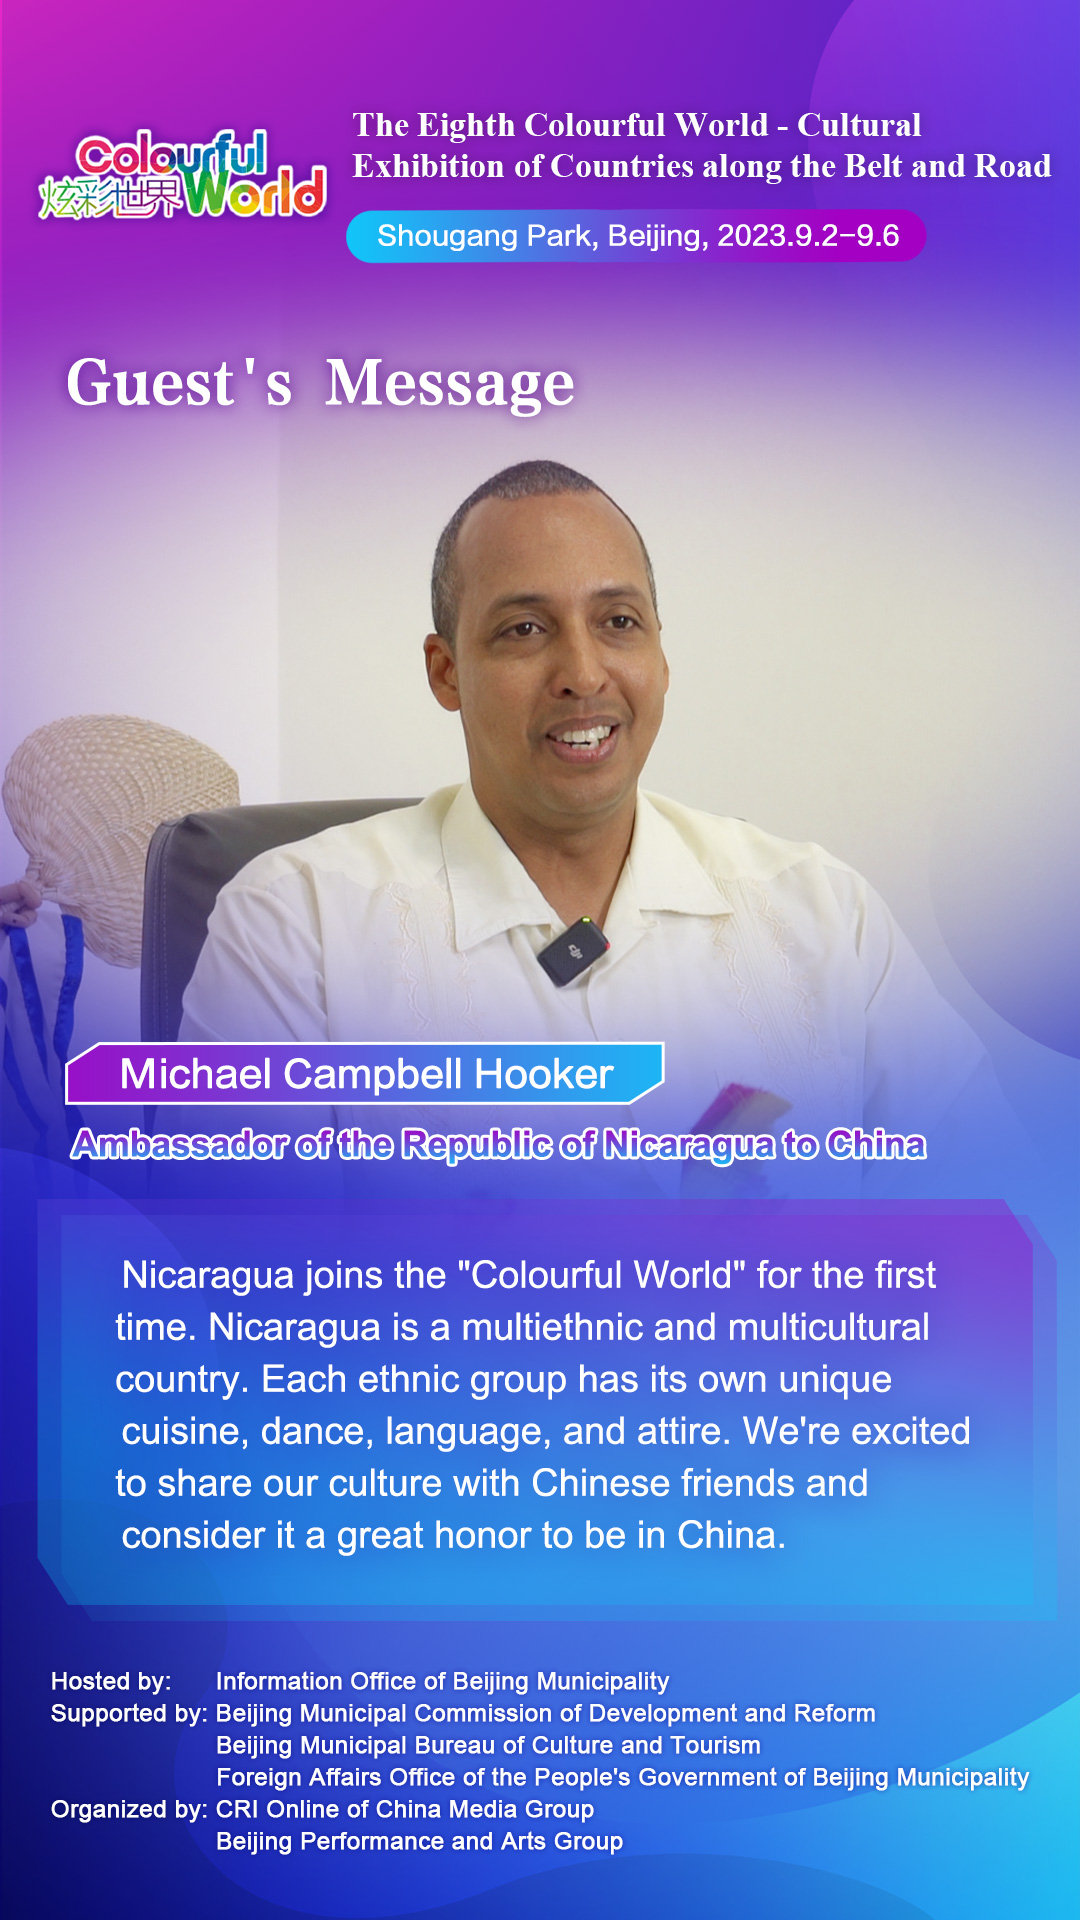 Guest’s Message - Michael Campbell Hooker, Ambassador of the Republic of Nicaragua to China_fororder_第八屆“炫彩世界”-金句海報-English-尼加拉瓜(1)